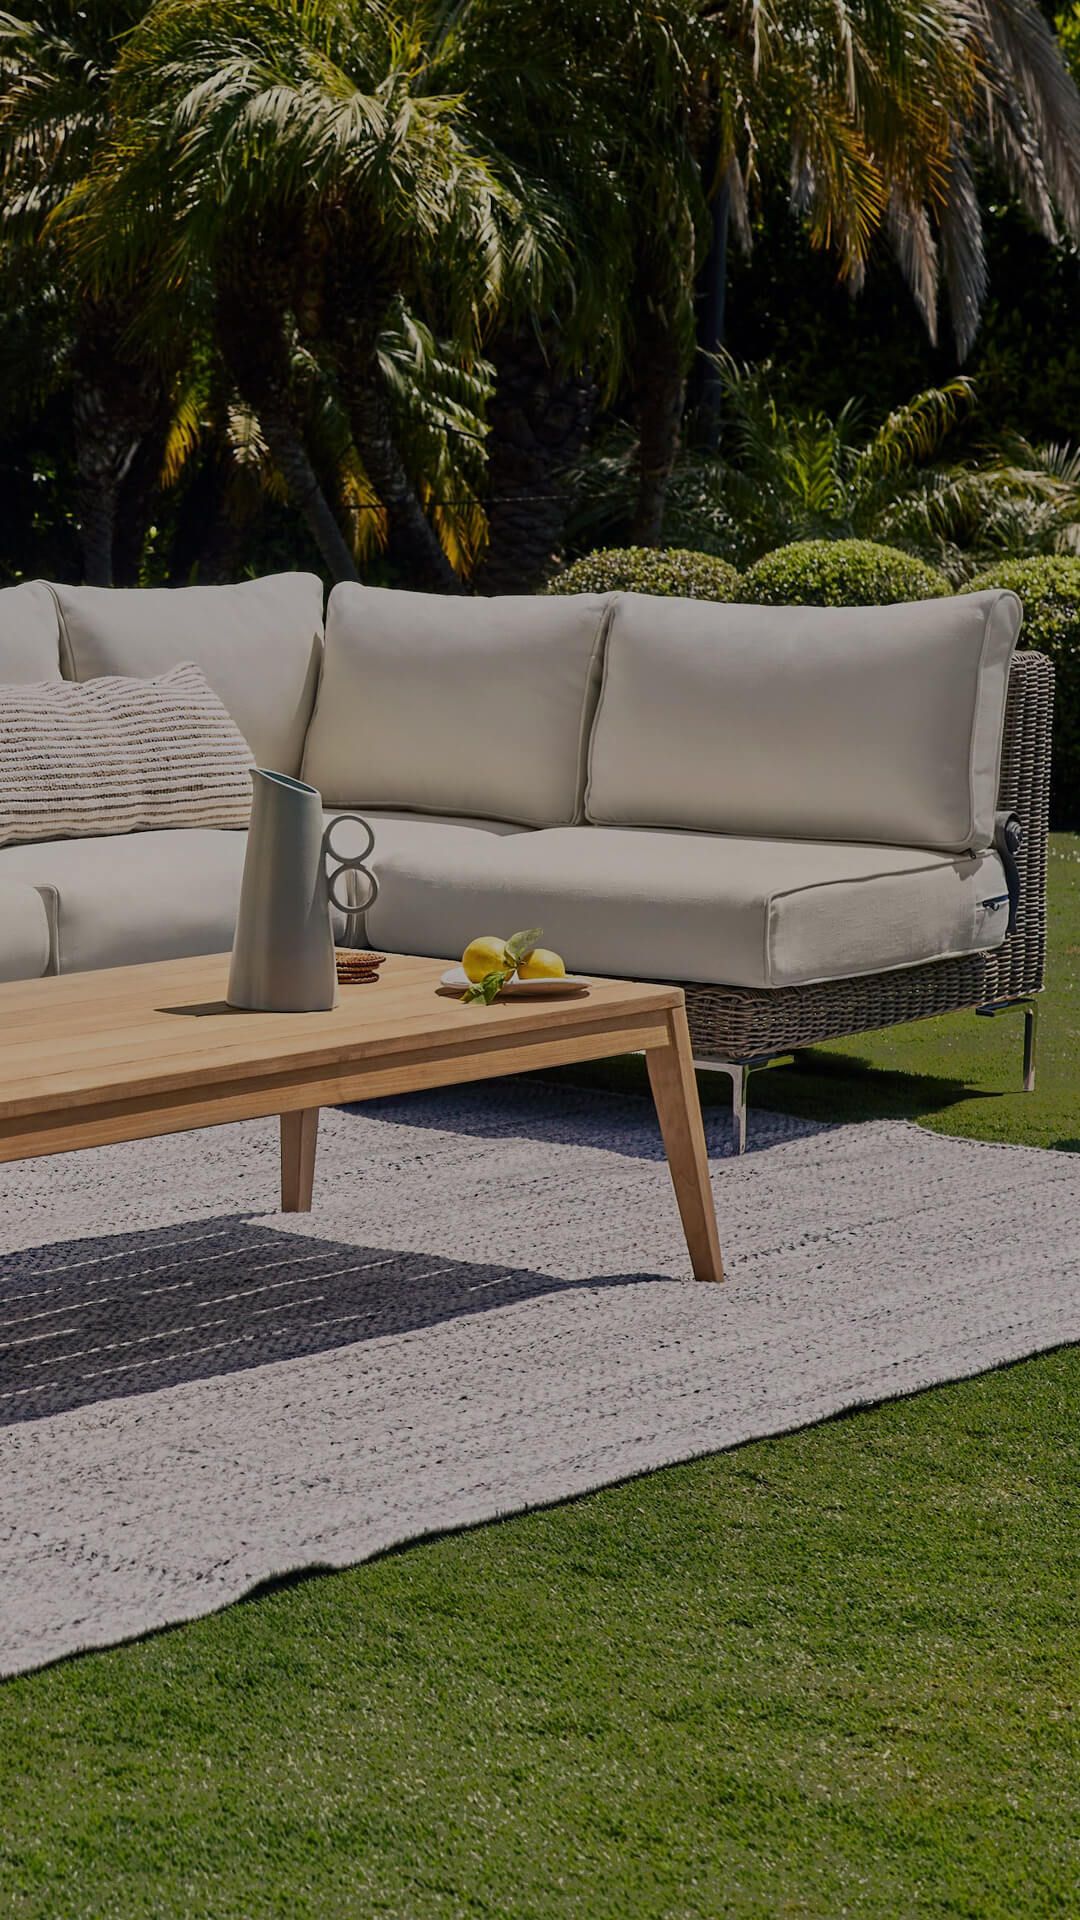 Outer  Modular Outdoor Brown Wicker Furniture